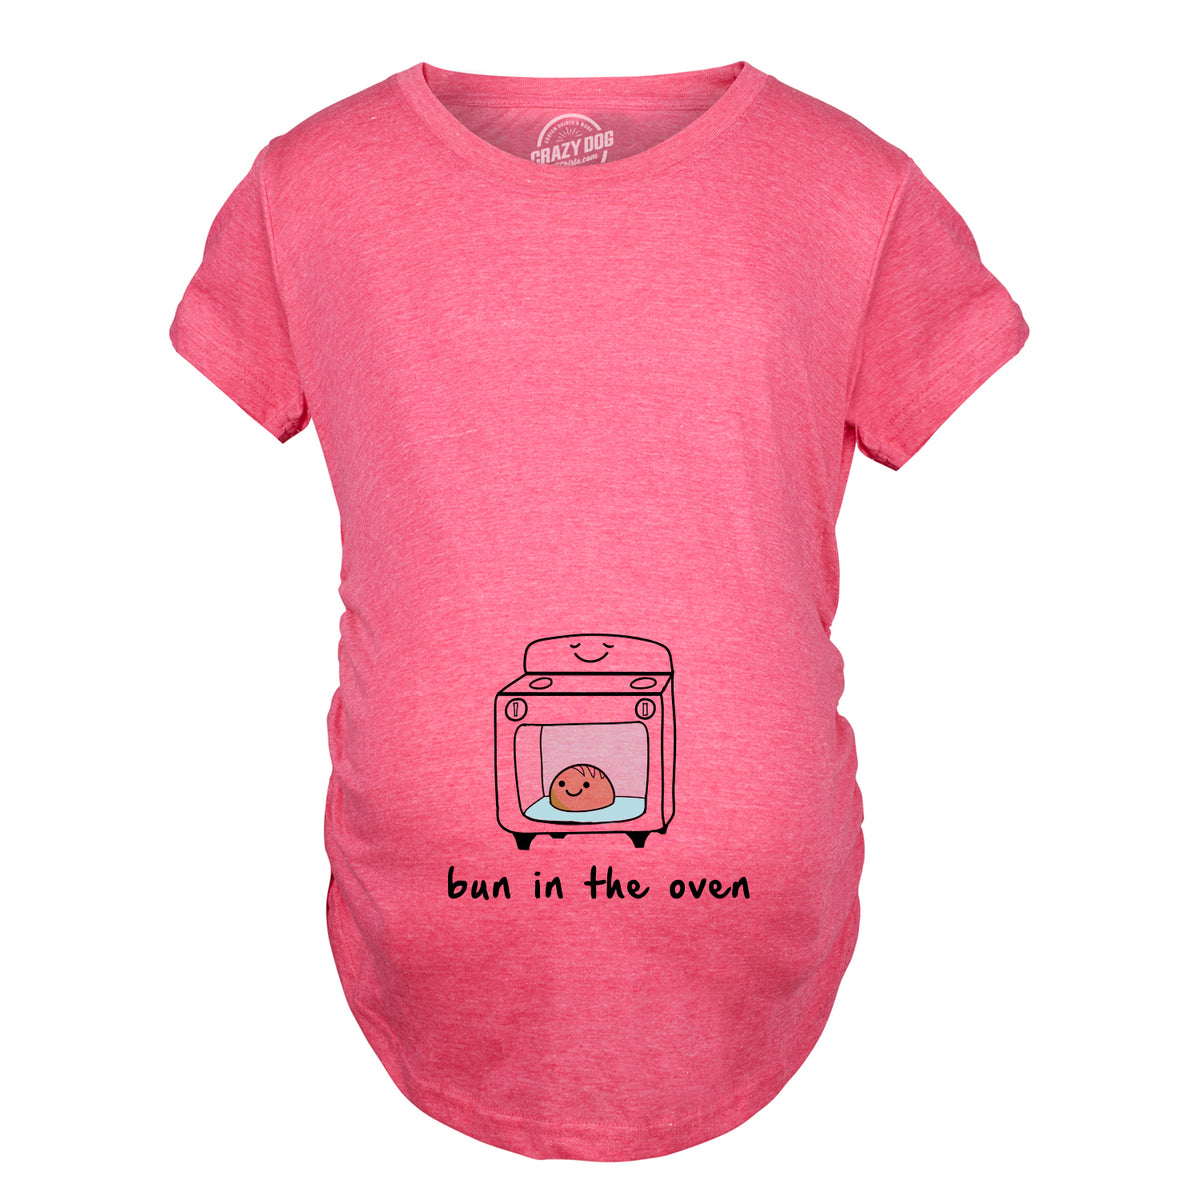 Funny Heather Pink Bun In The Oven Maternity T Shirt Nerdy Food Tee